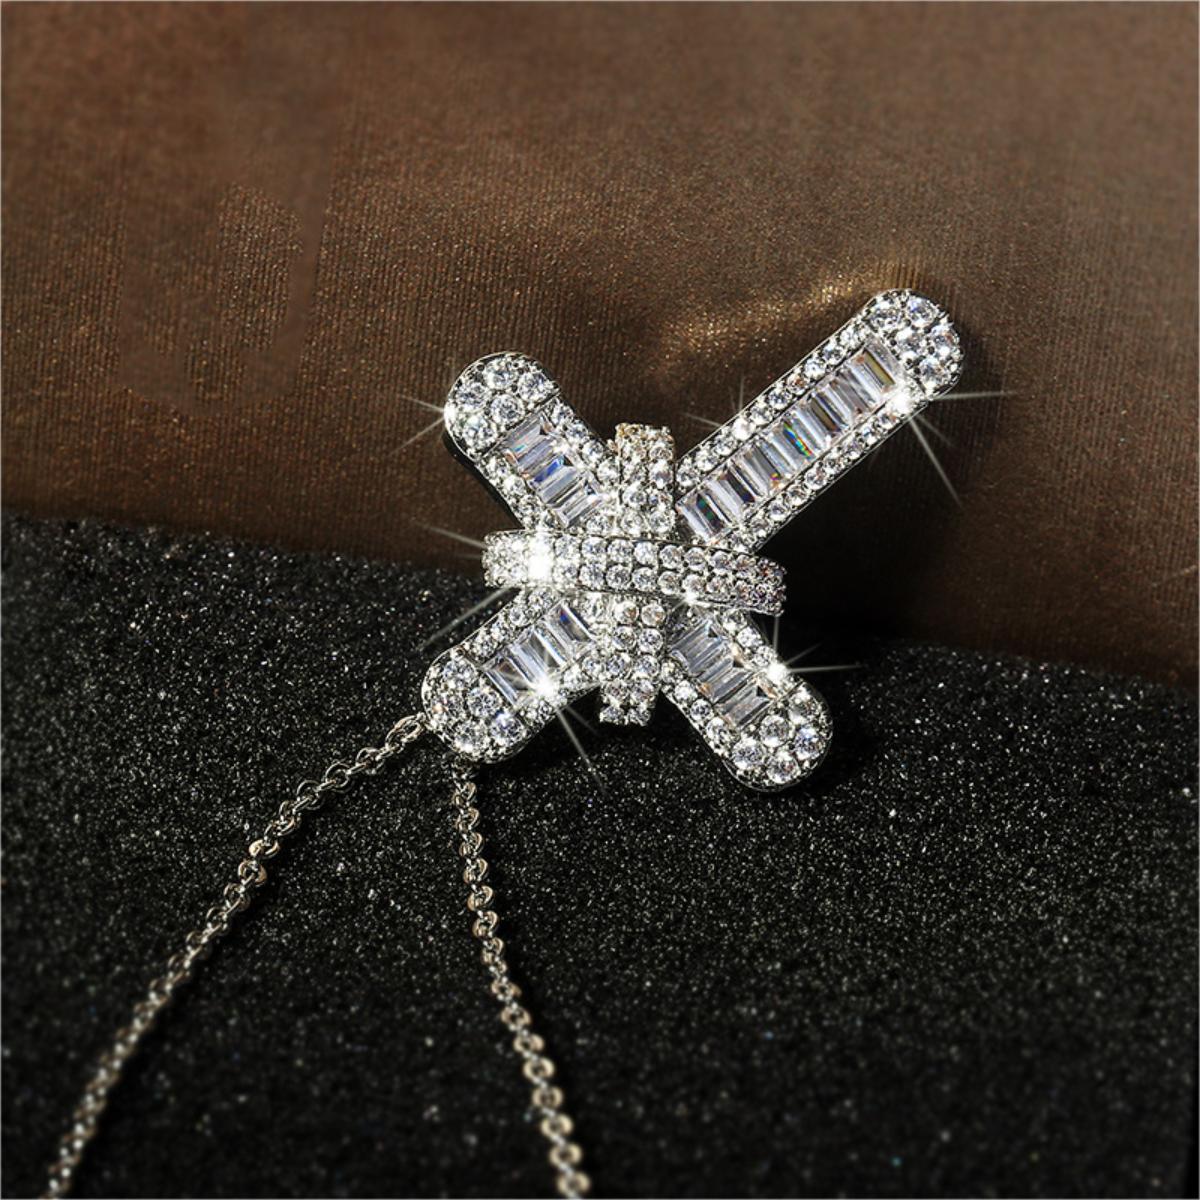 Womens Crystal Cross Necklace Sliver HIP-HOP Pendant for Men Religious Christian Jewelry Gifts for Anniversaries Holidays Christmas Birthdays